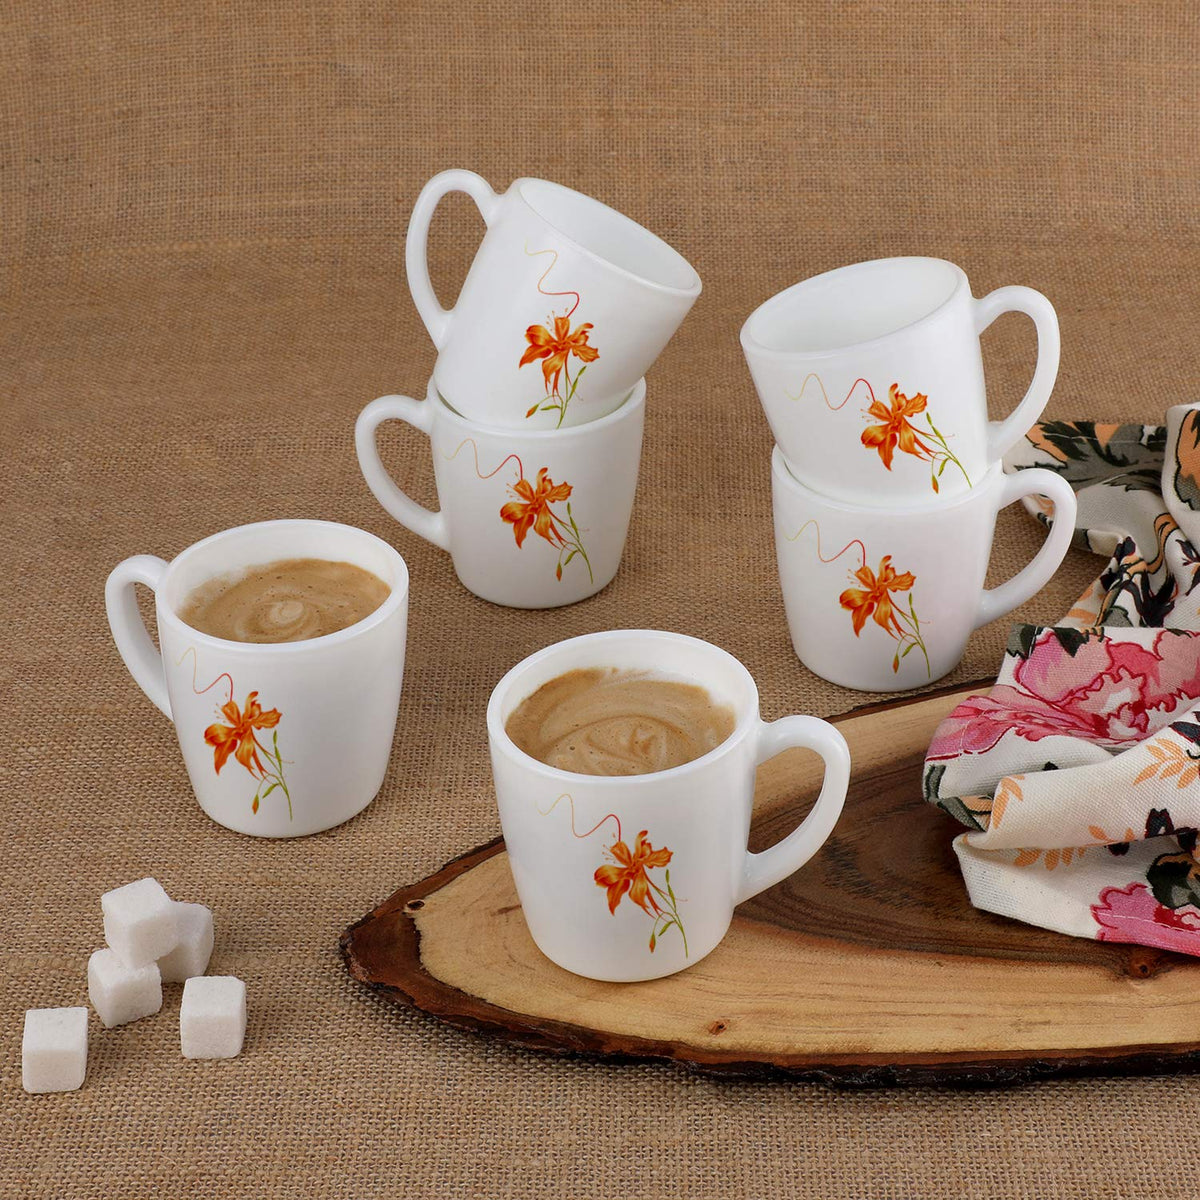 Imperial Orange Lily Ricca Mugs, 6 Pieces Small / 6 Pieces